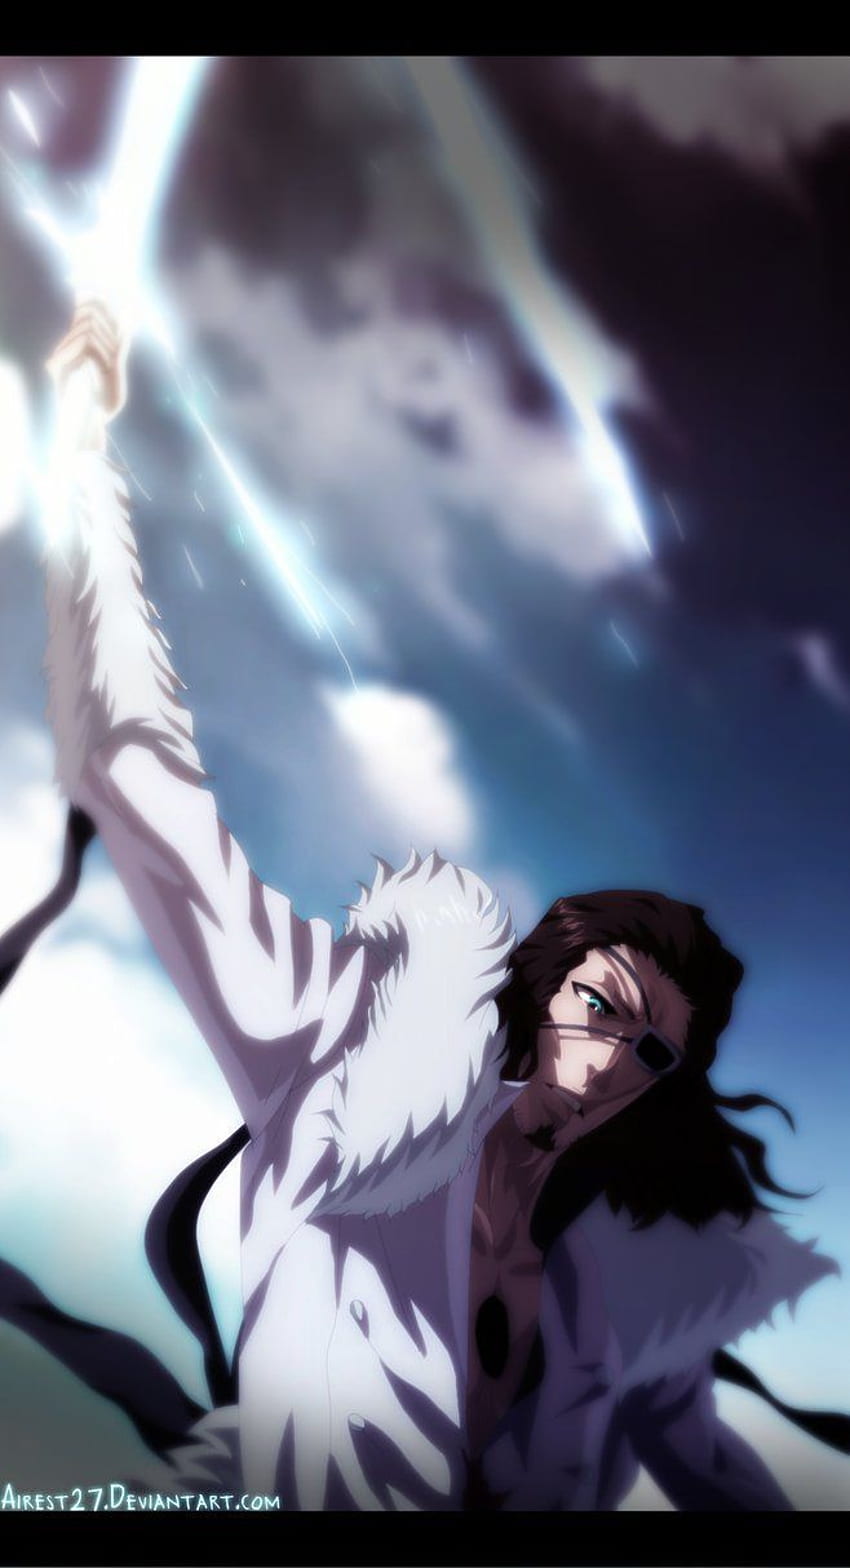 1920x1080px, 1080P Free download | Coyote Starrk - Bleach. Color ...